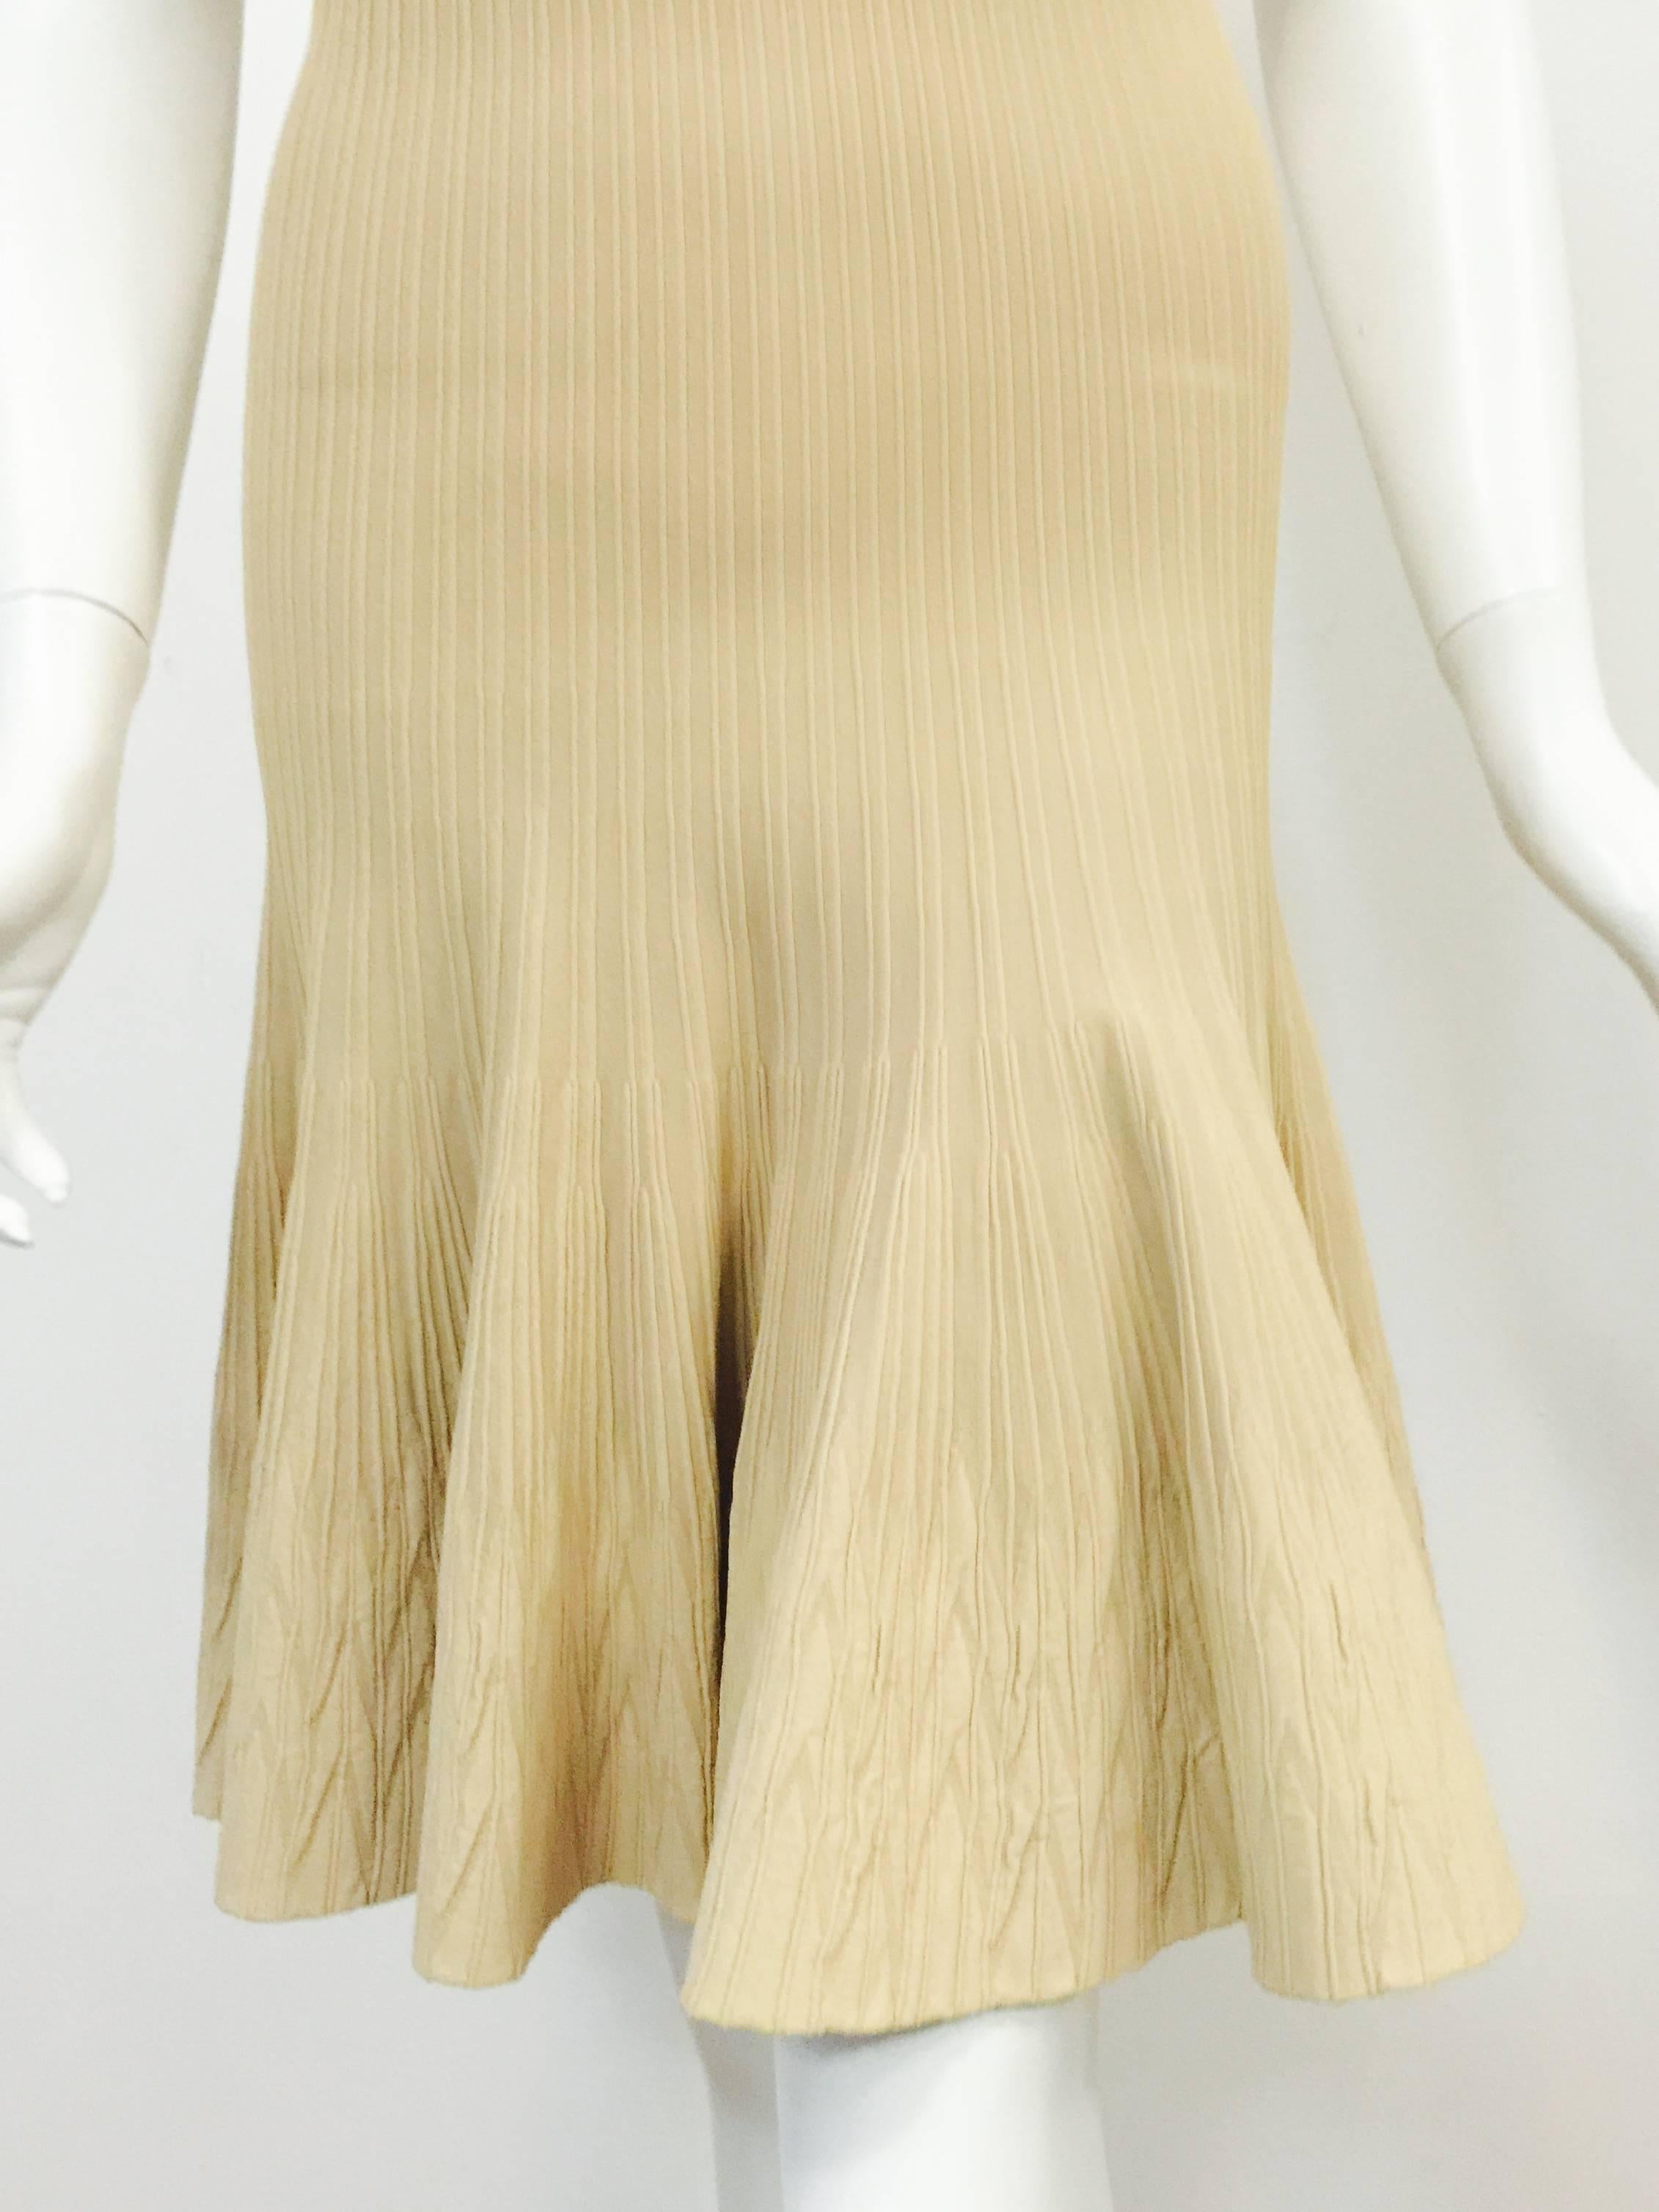 Alaia Paris Butter Cream Sleeveless Body Conscious Dress With Flounce Skirt  In Excellent Condition For Sale In Palm Beach, FL